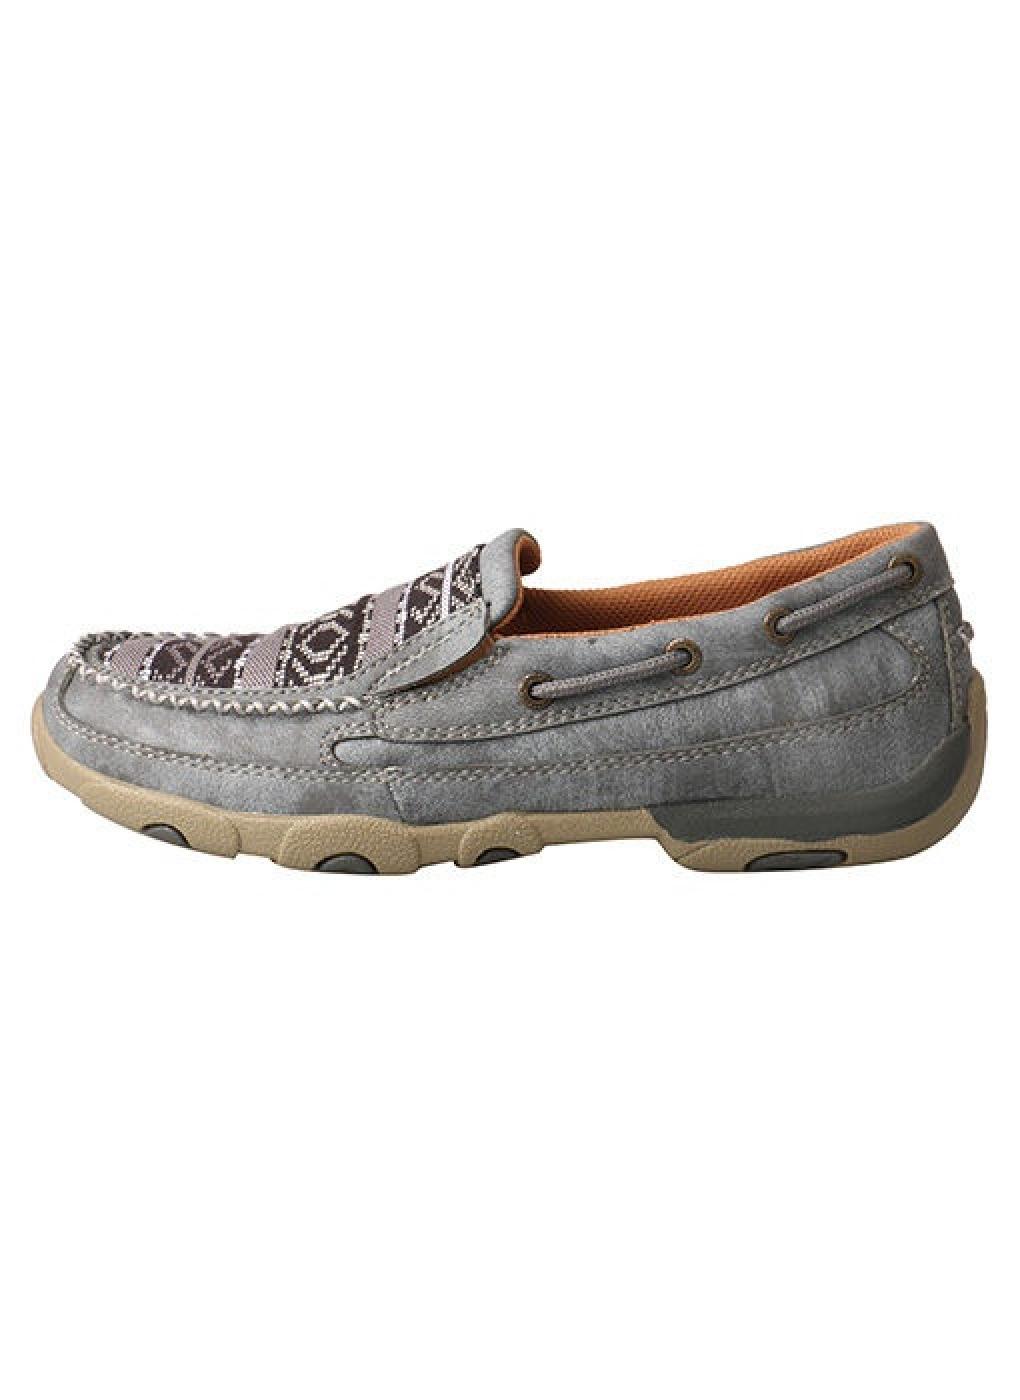 Twisted X Women's Slip-On Driving Moc Profile View